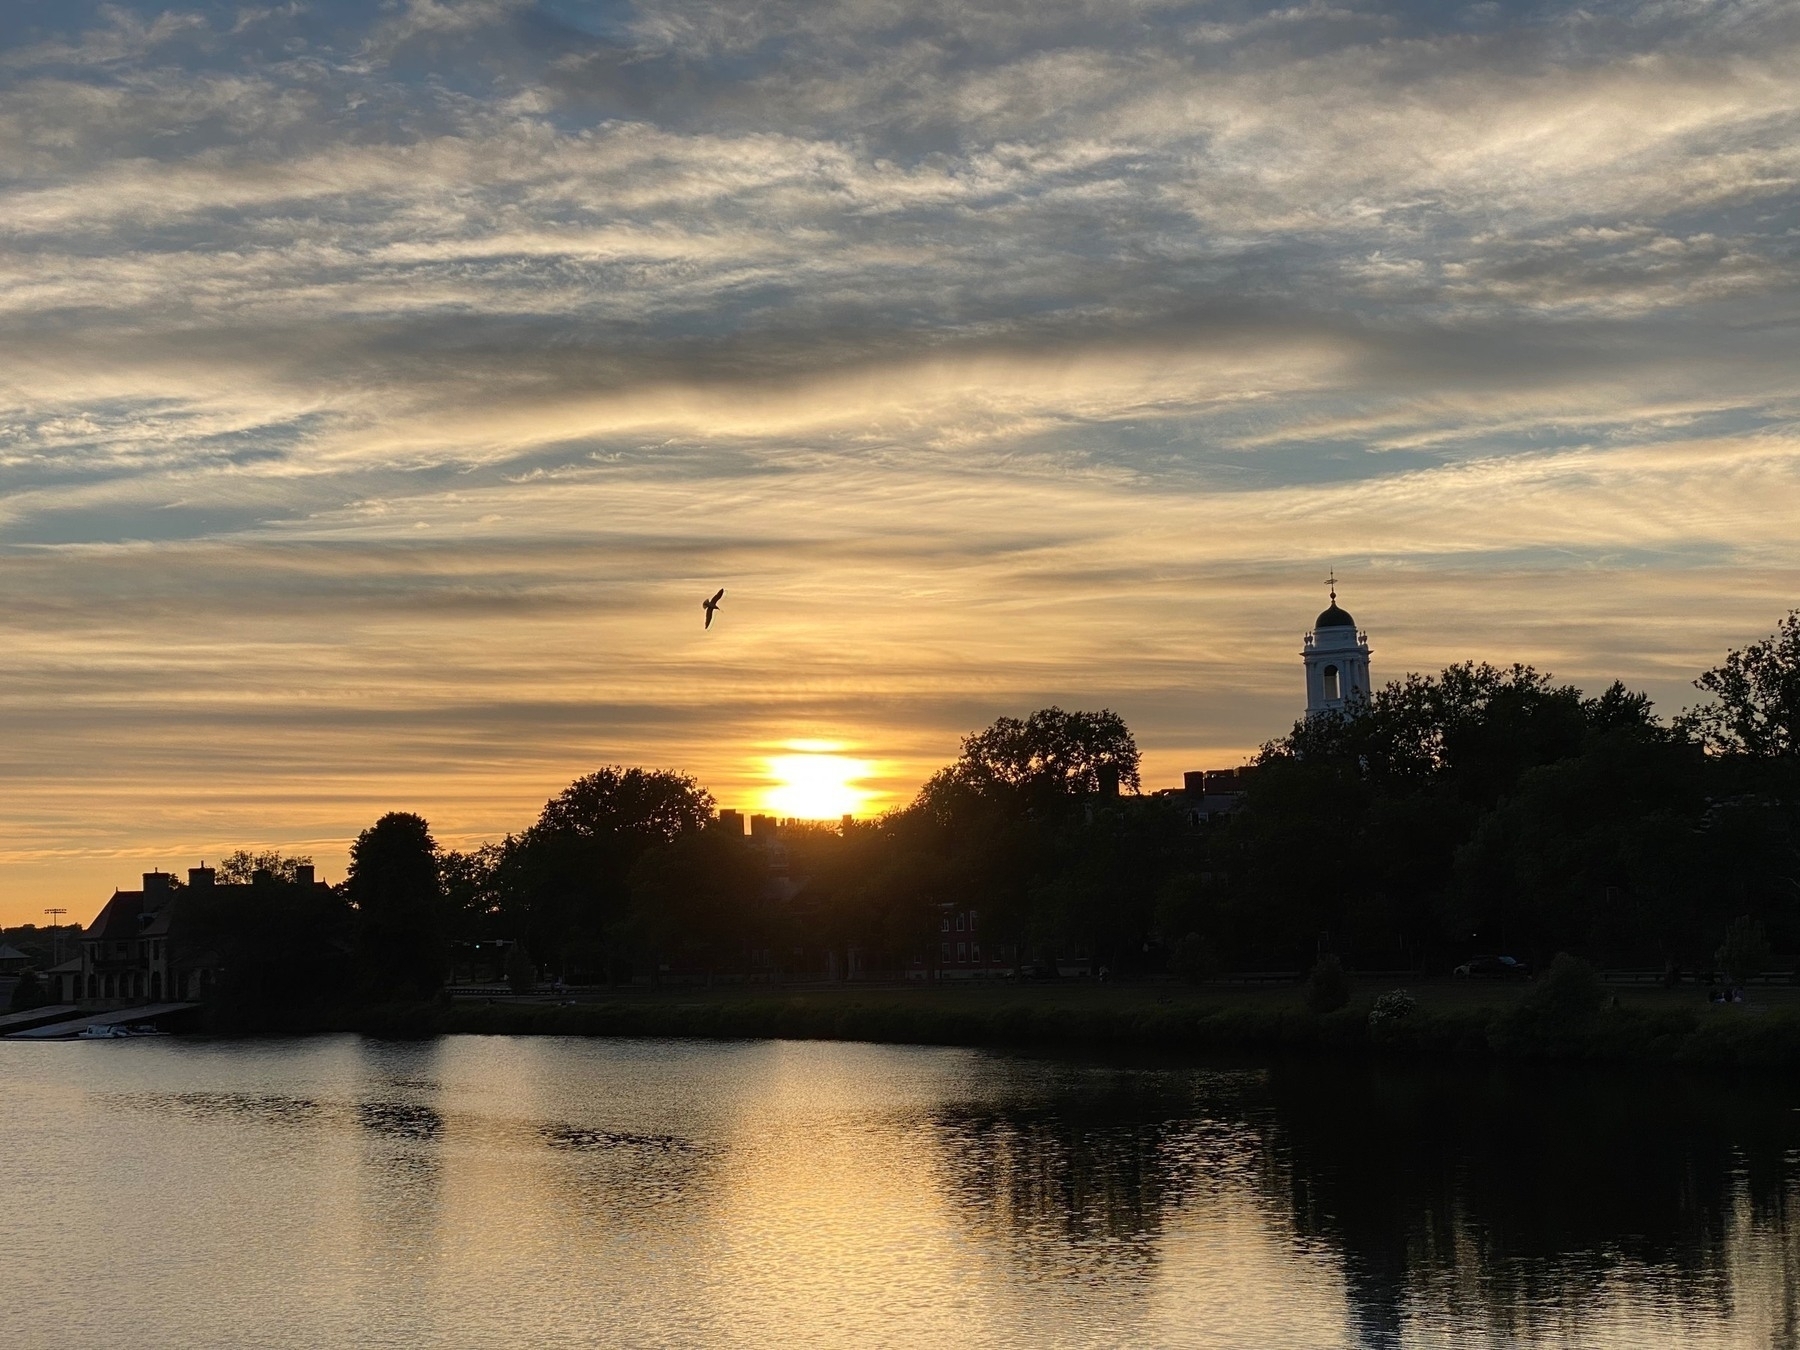 View of a hazy yellow sunset with clouds above and a river below, trees and buildings silhouetted in the middle and a single seagull flying above the setting sun.